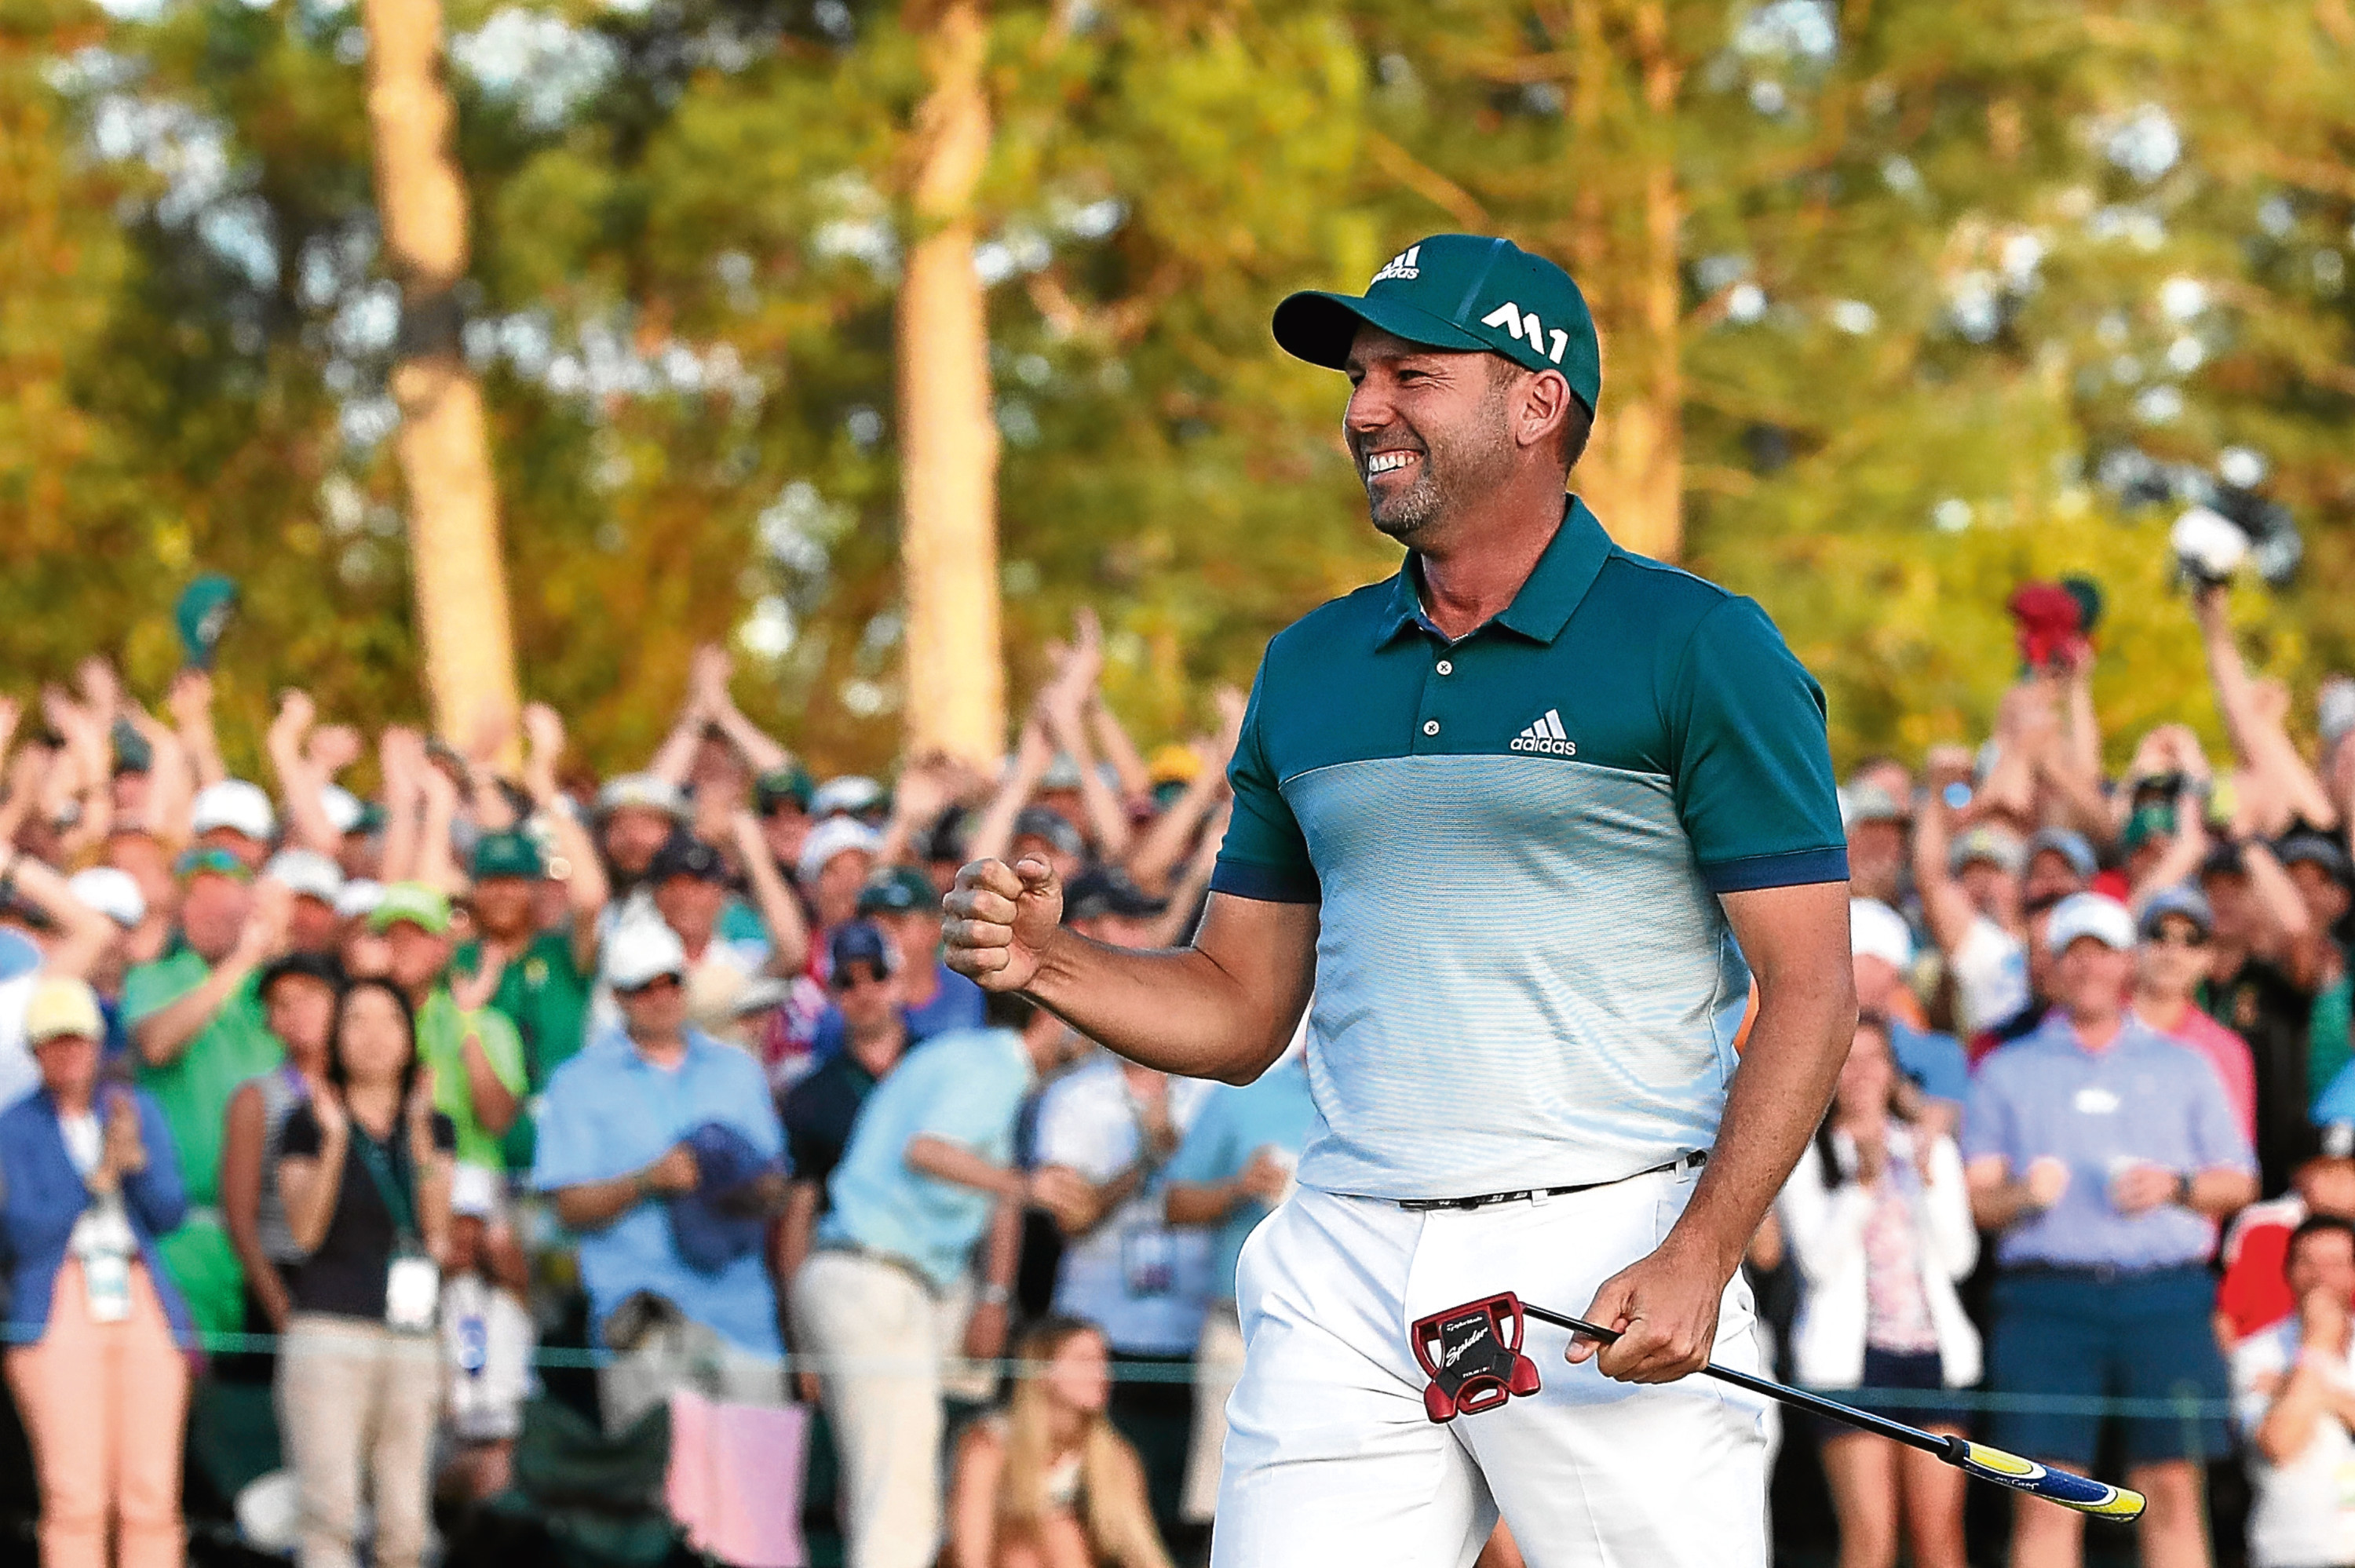 Sergio Gracia shows the emotion of his long-awaited first major title at the Masters on Sunday.